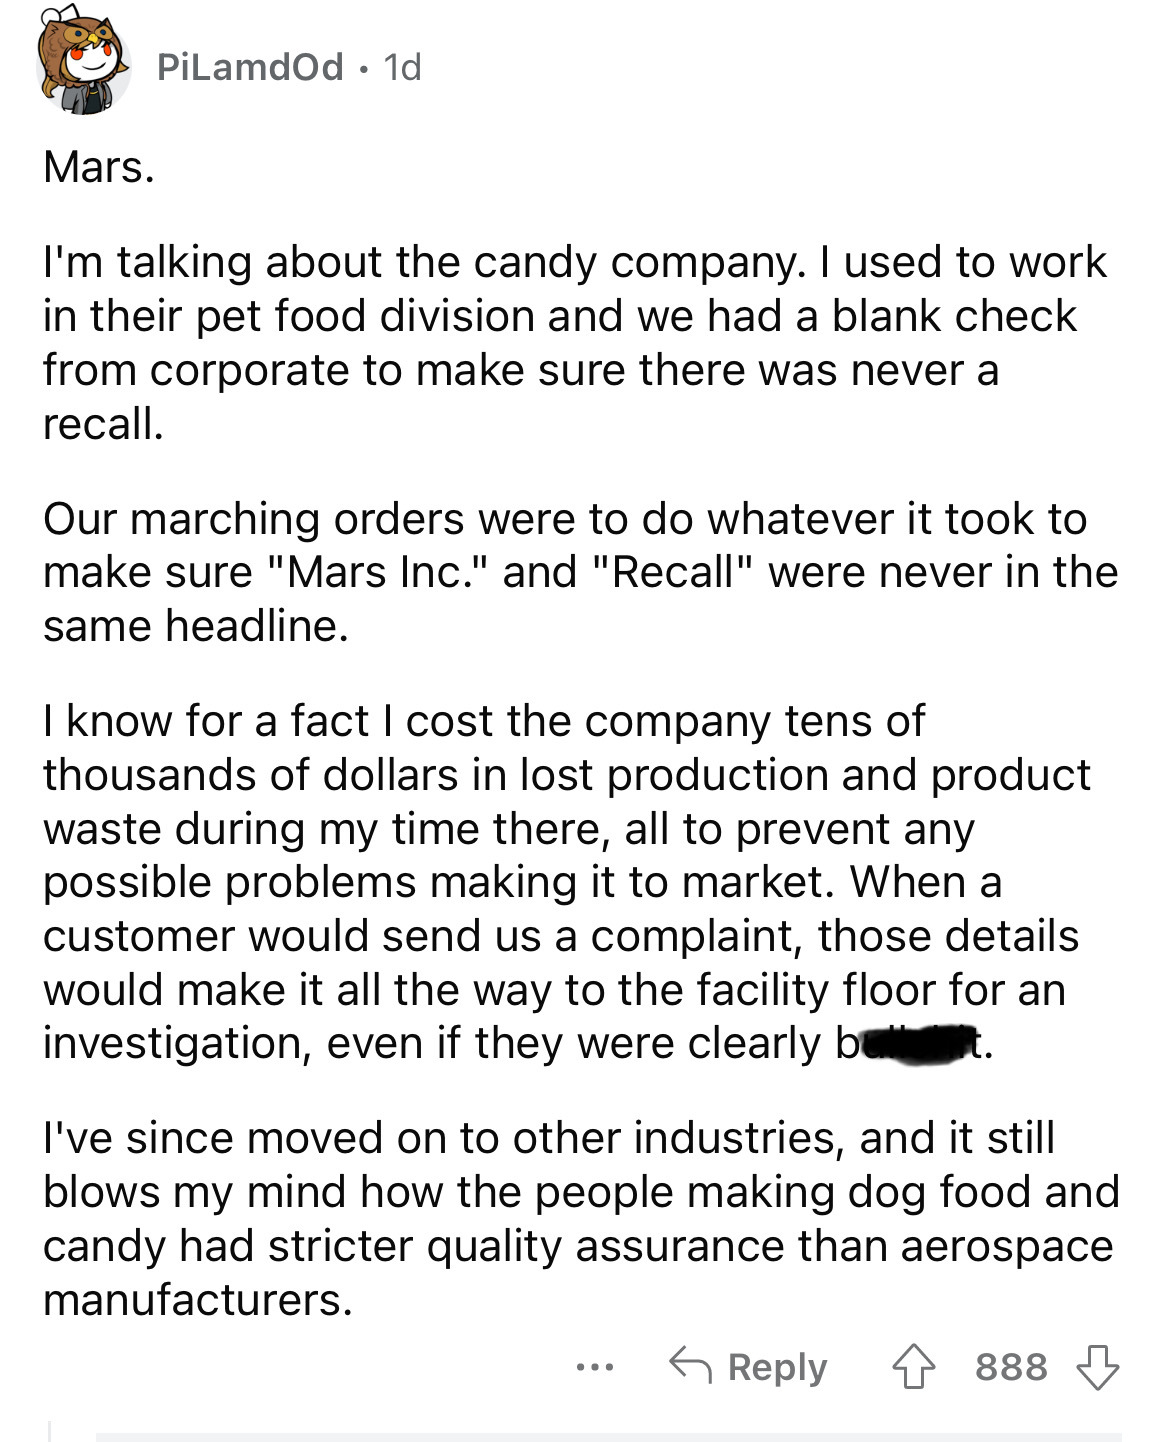 document - Mars. PiLamdOd 1d I'm talking about the candy company. I used to work in their pet food division and we had a blank check from corporate to make sure there was never a recall. Our marching orders were to do whatever it took to make sure "Mars I